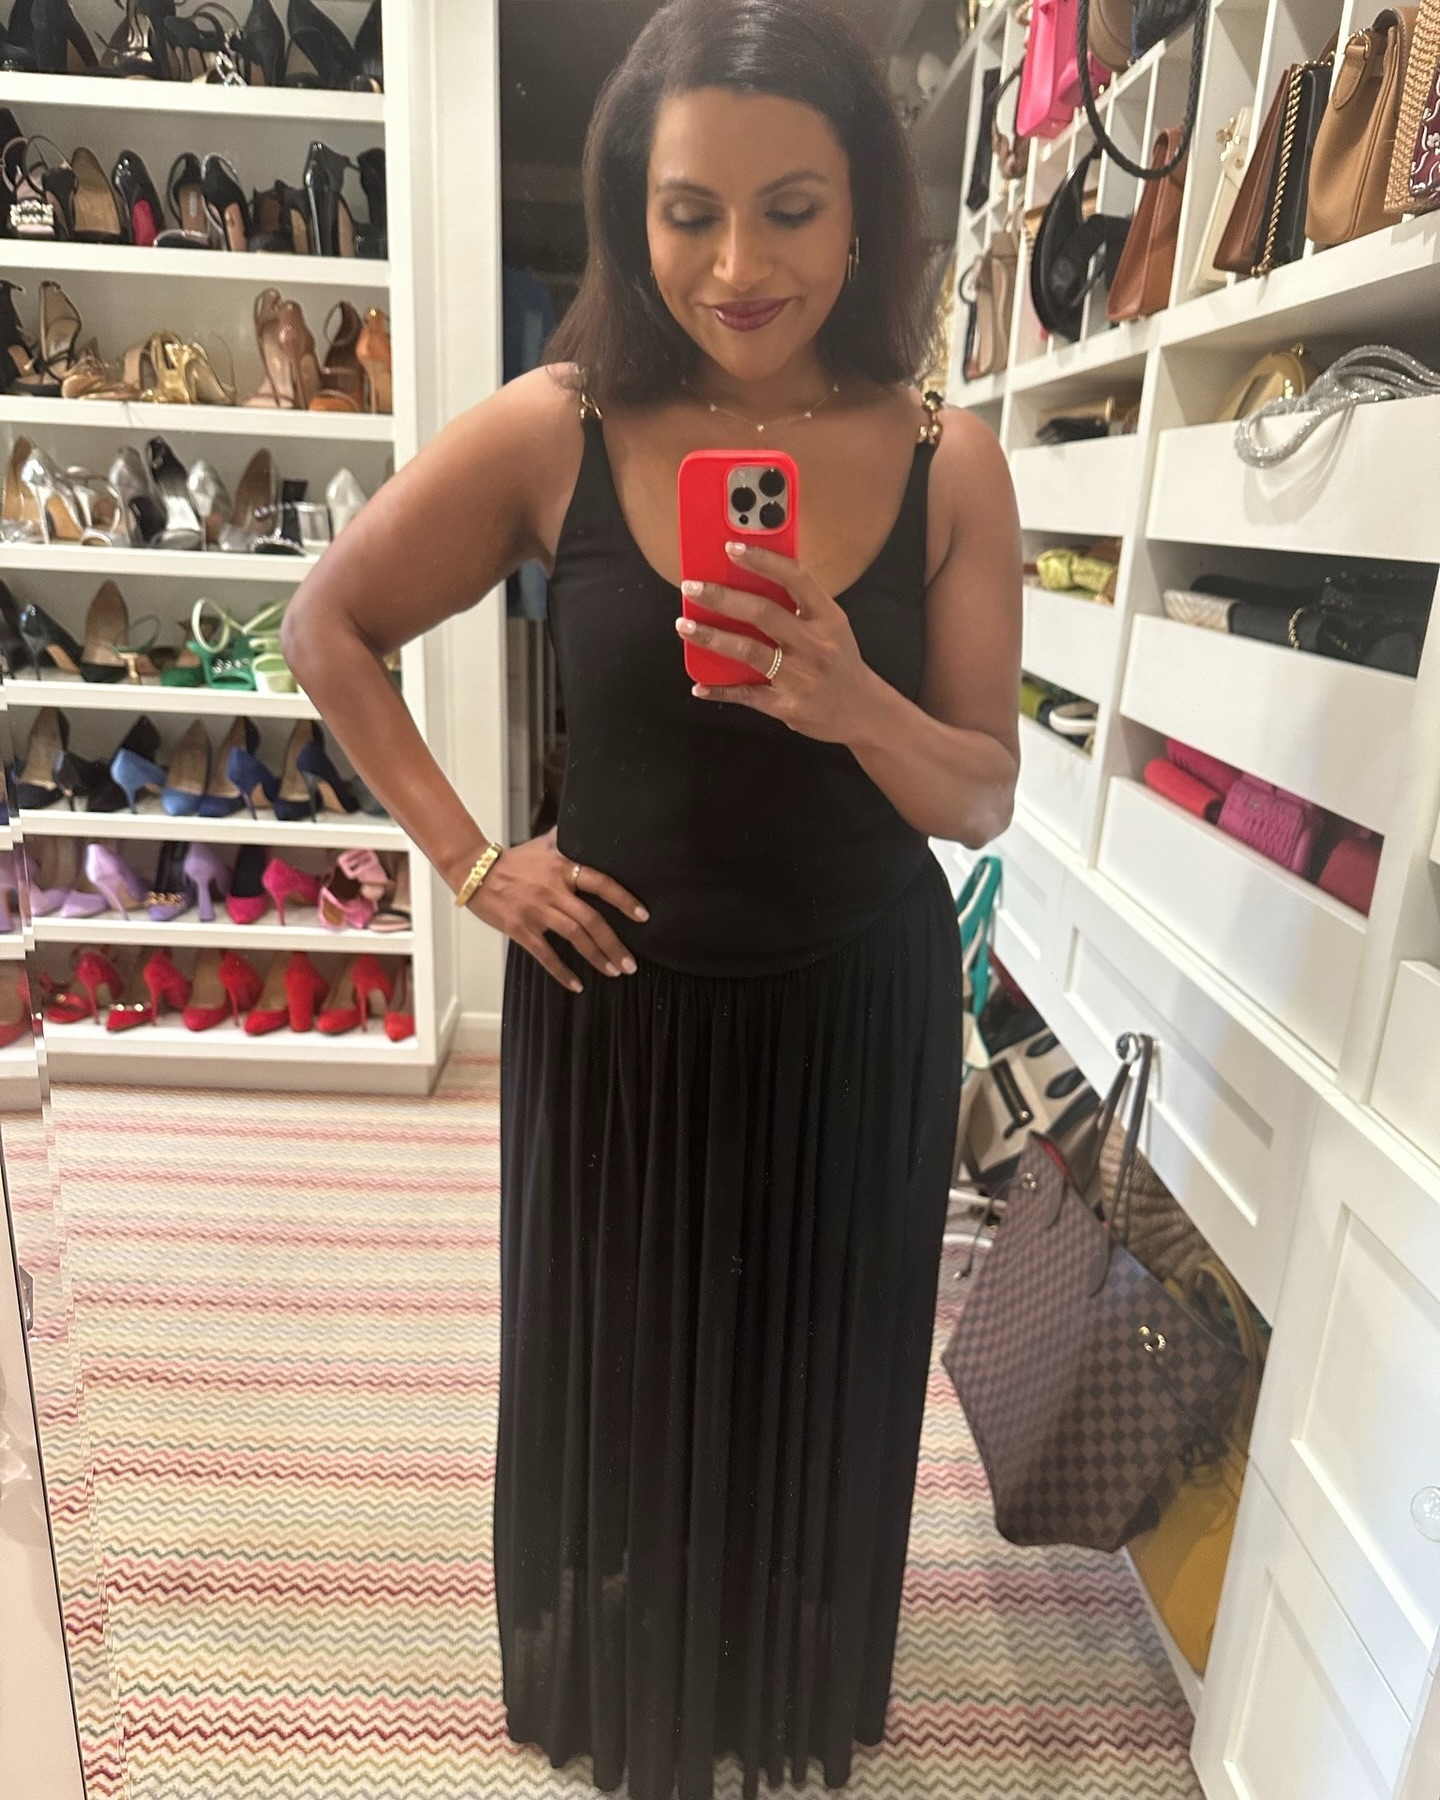 Mindy Kaling shows off her slimmed-down figure in a black dress while posing for a mirror selfie in her closet